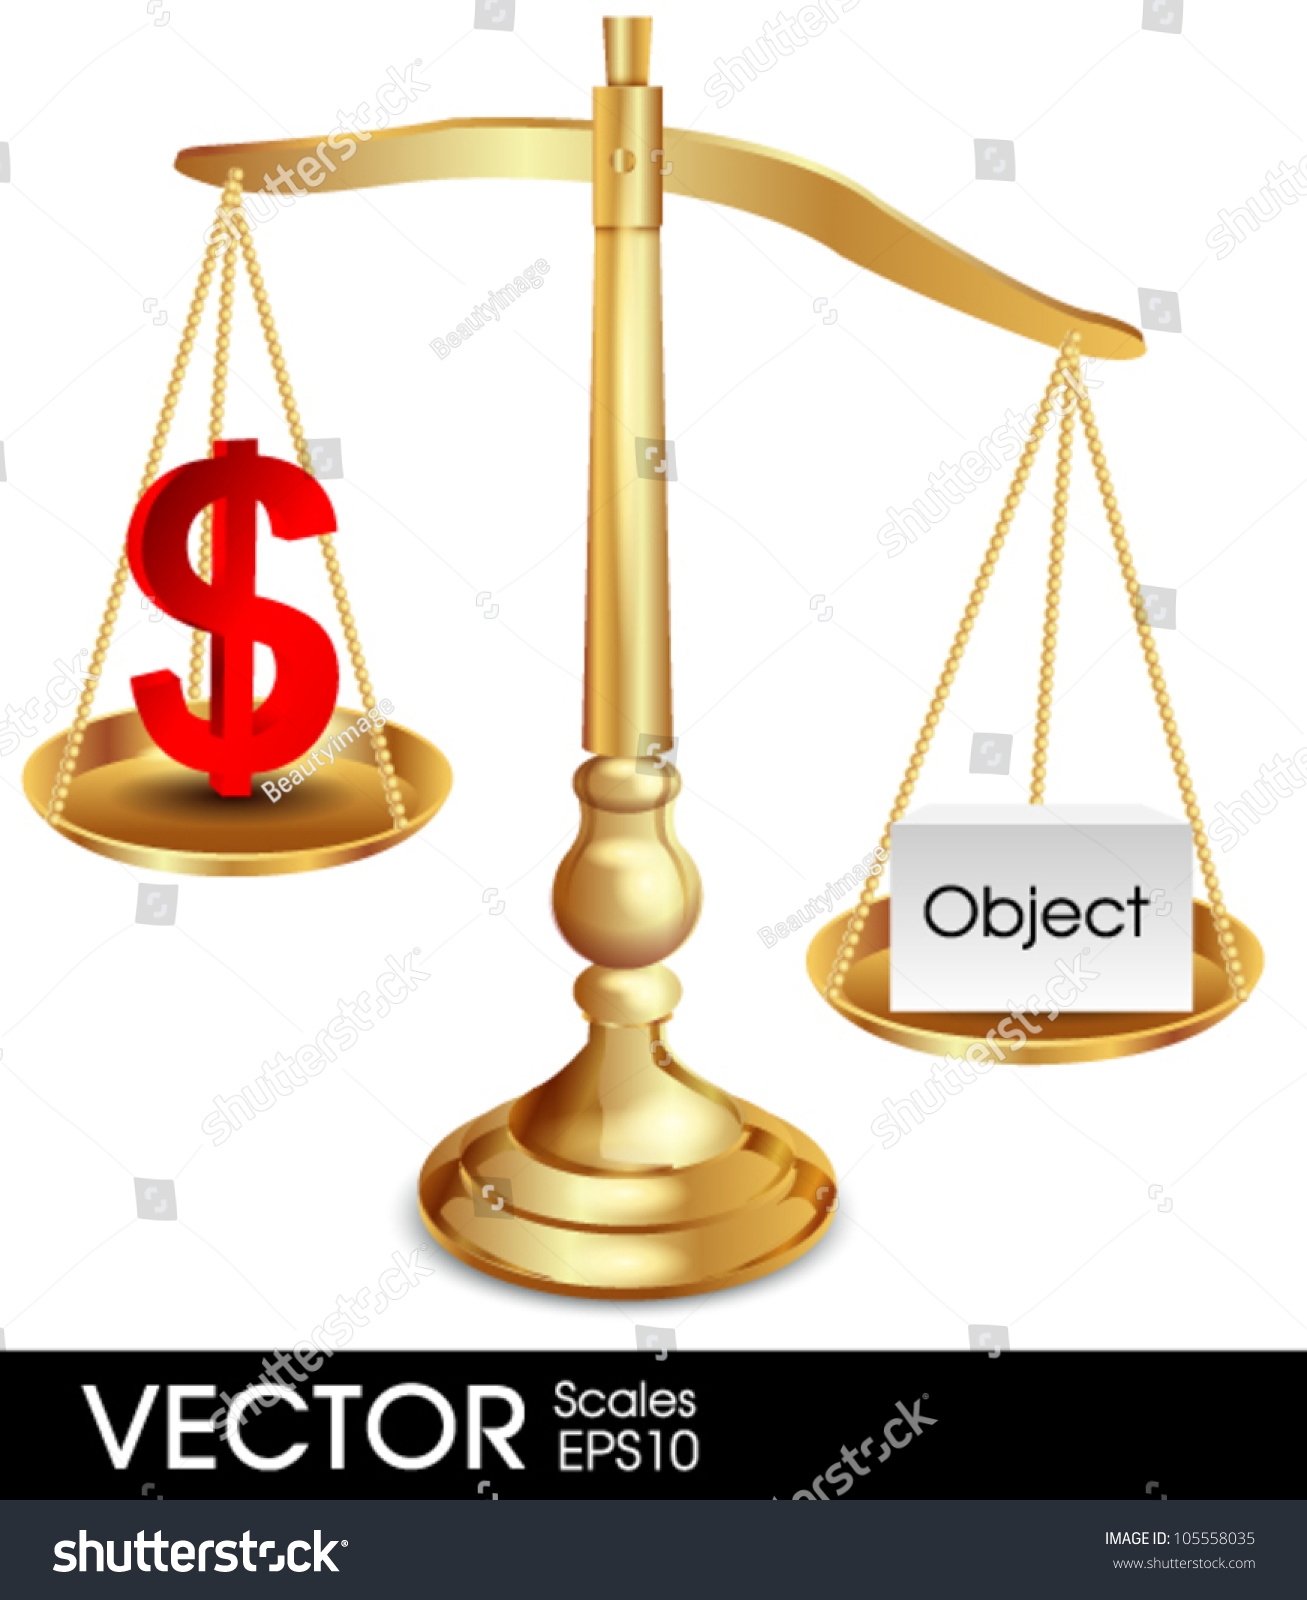 Vintage Scales With Dollar Sign And Object Stock Vector Illustration 105558035 Shutterstock 3144